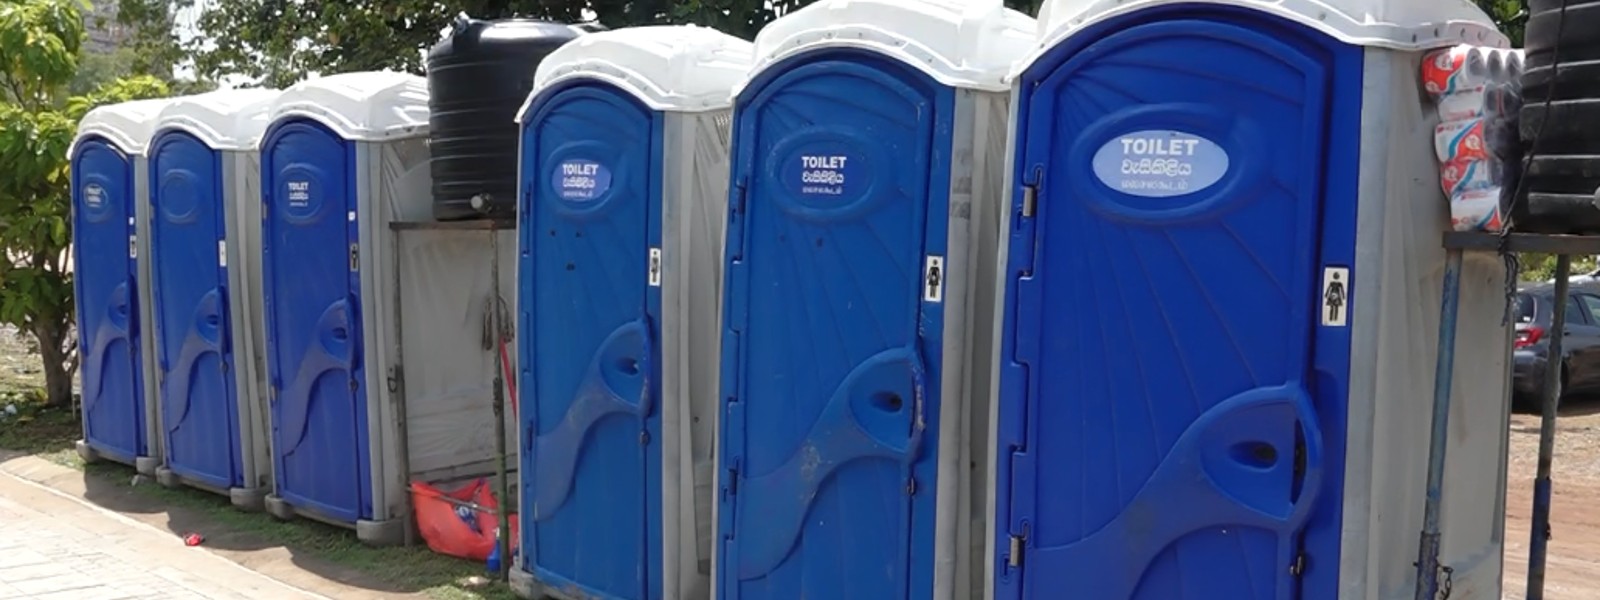 Portable toilets for Occupy Galle Face protest, but will be taken away?